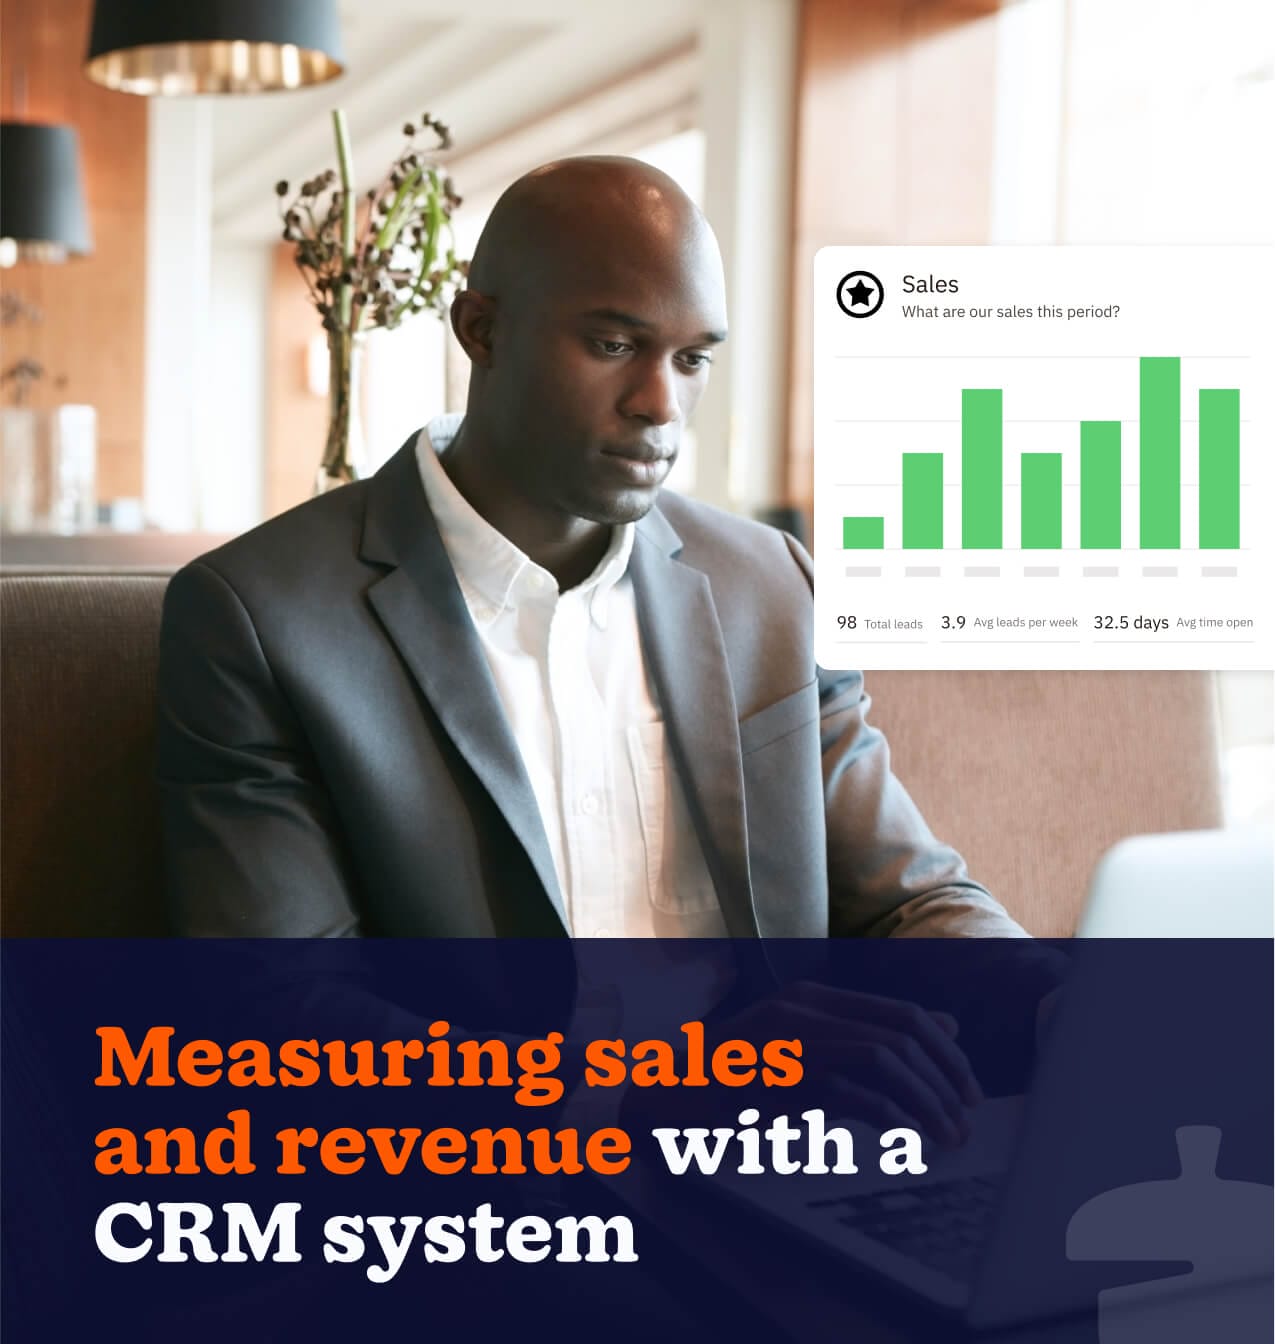 Measuring sales and revenue with a CRM system